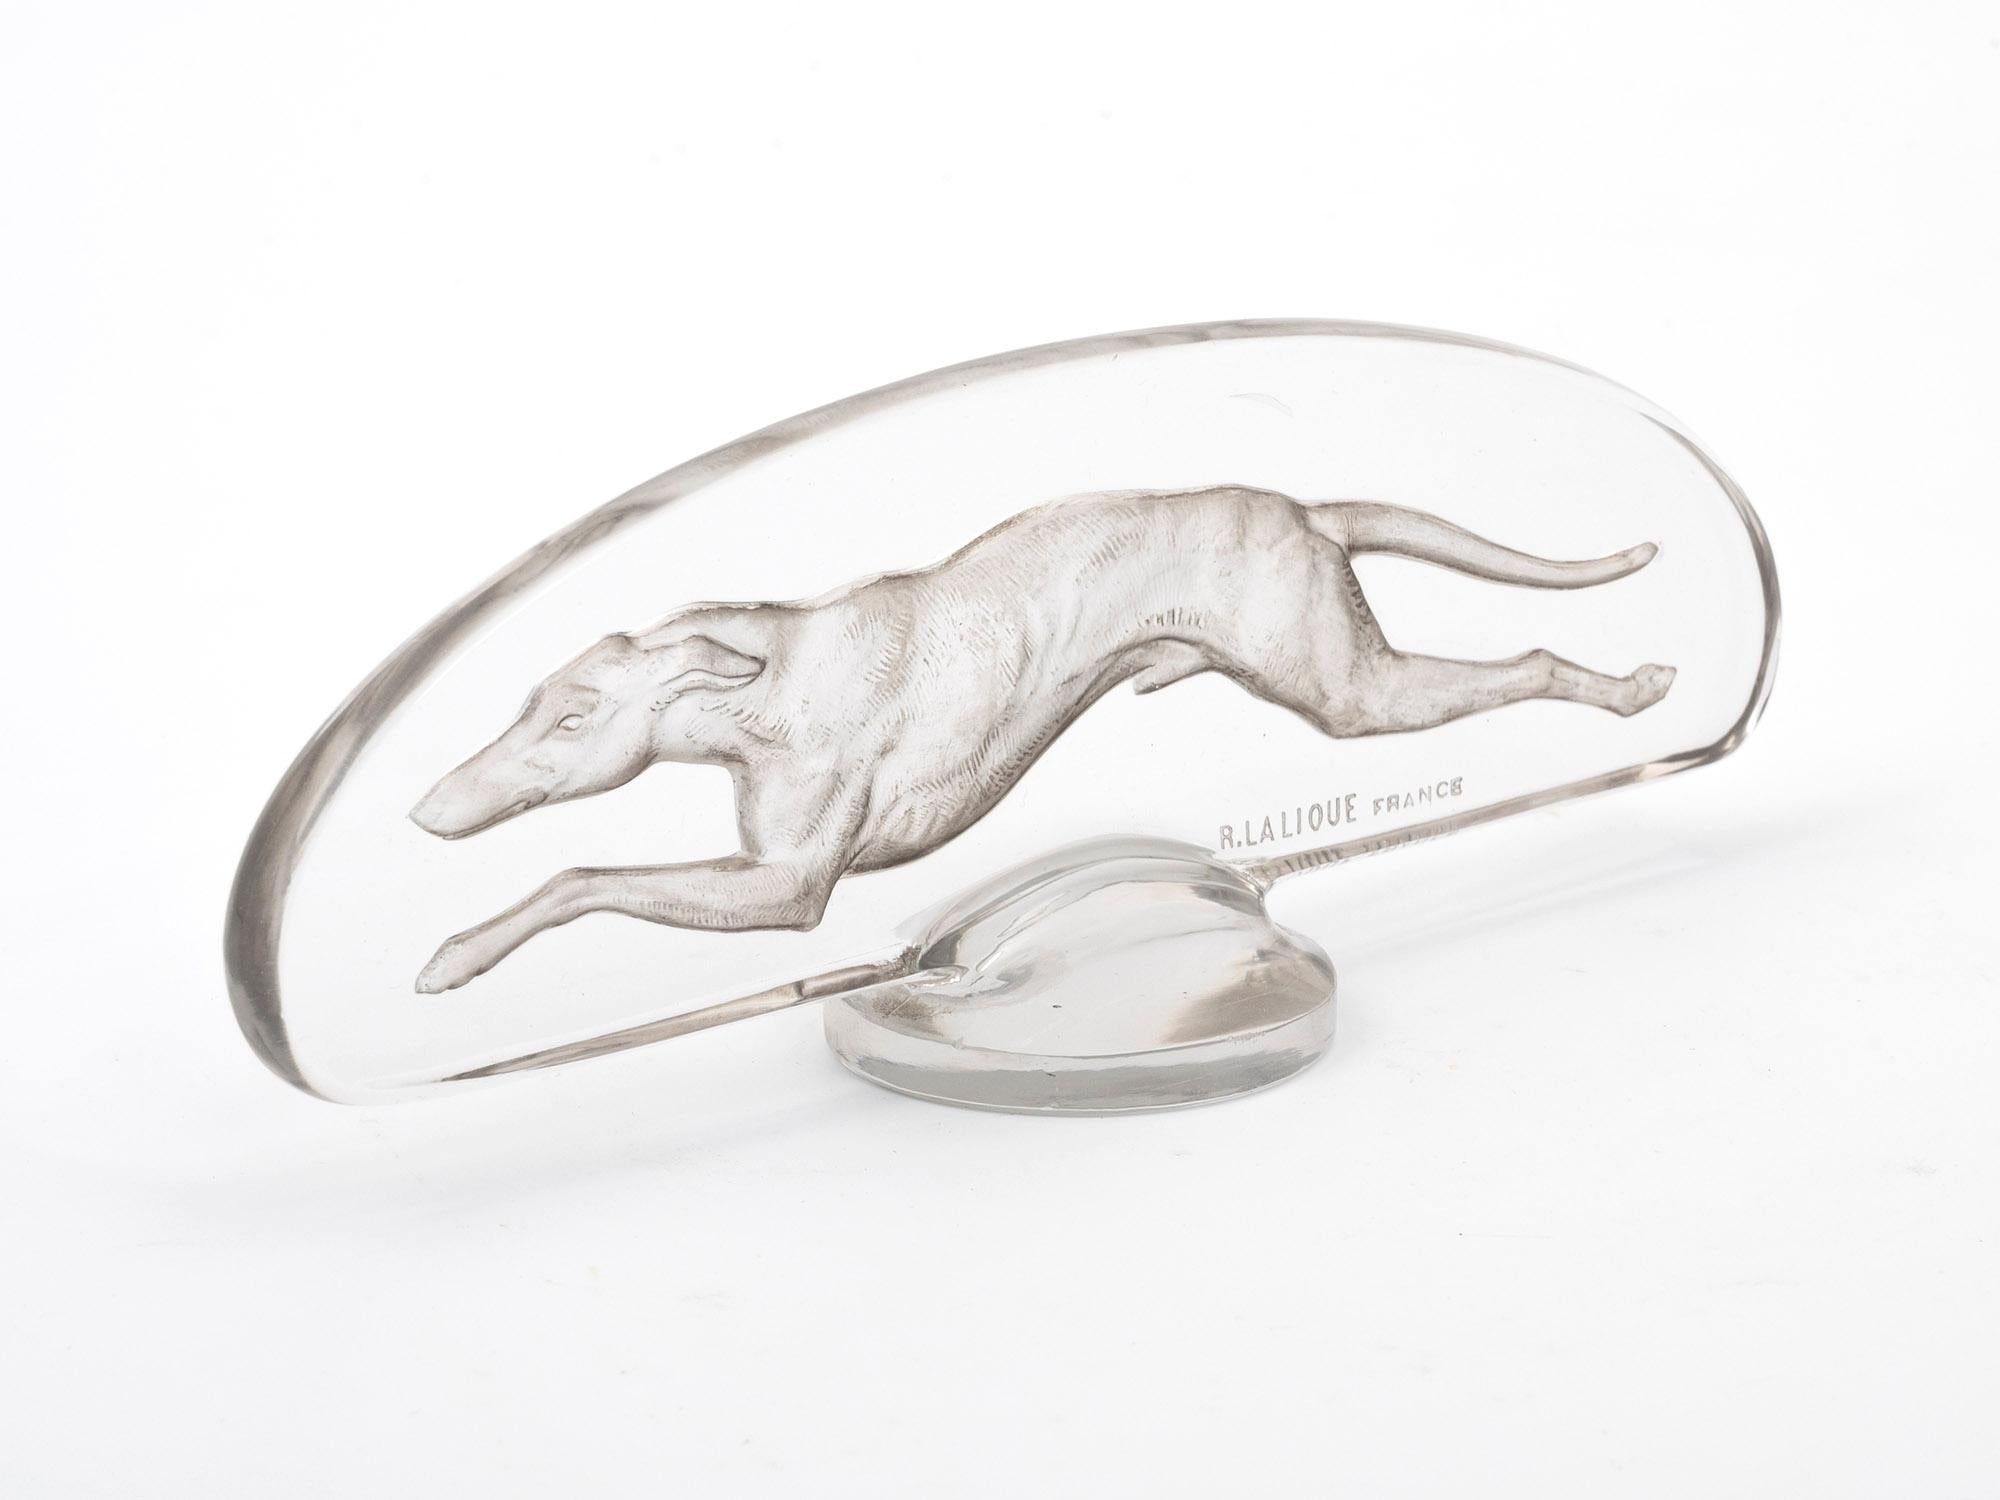 This Levrier (Greyhound) Car Mascot was designed and produced by renowned glassmaker René Lalique. Mesmerizing, this piece is clear in colour, with a lovely bright reflection and patination.

This René Lalique Greyhound Car Mascot bears a finely